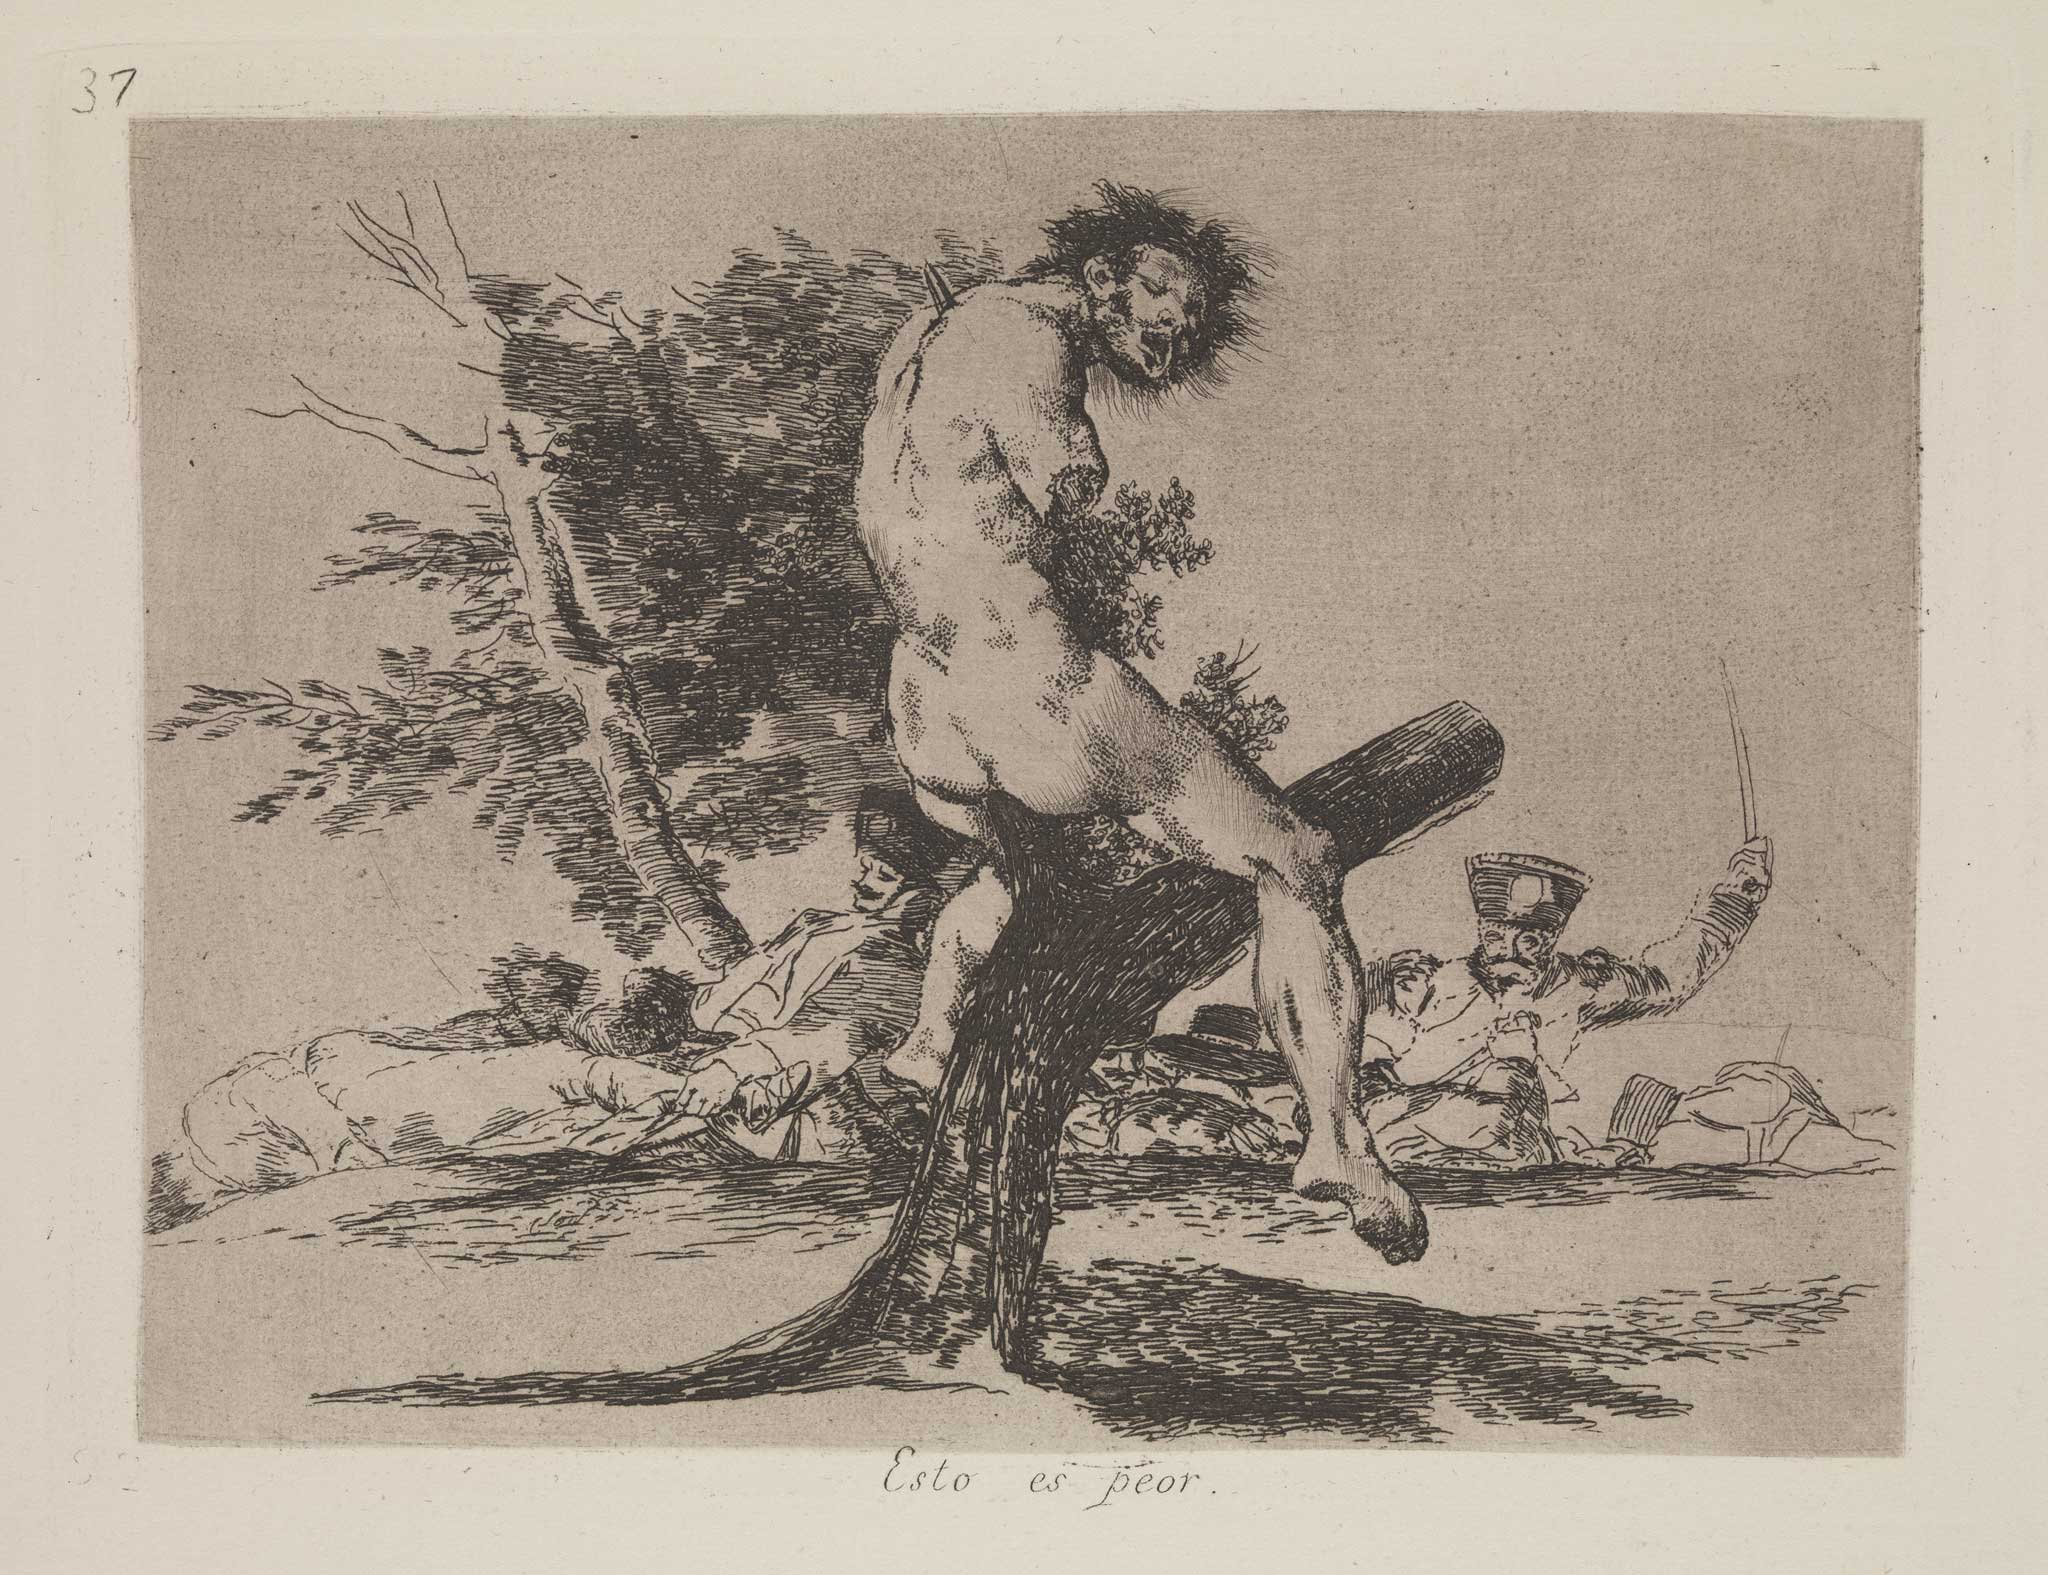 Goya's The Disasters of War